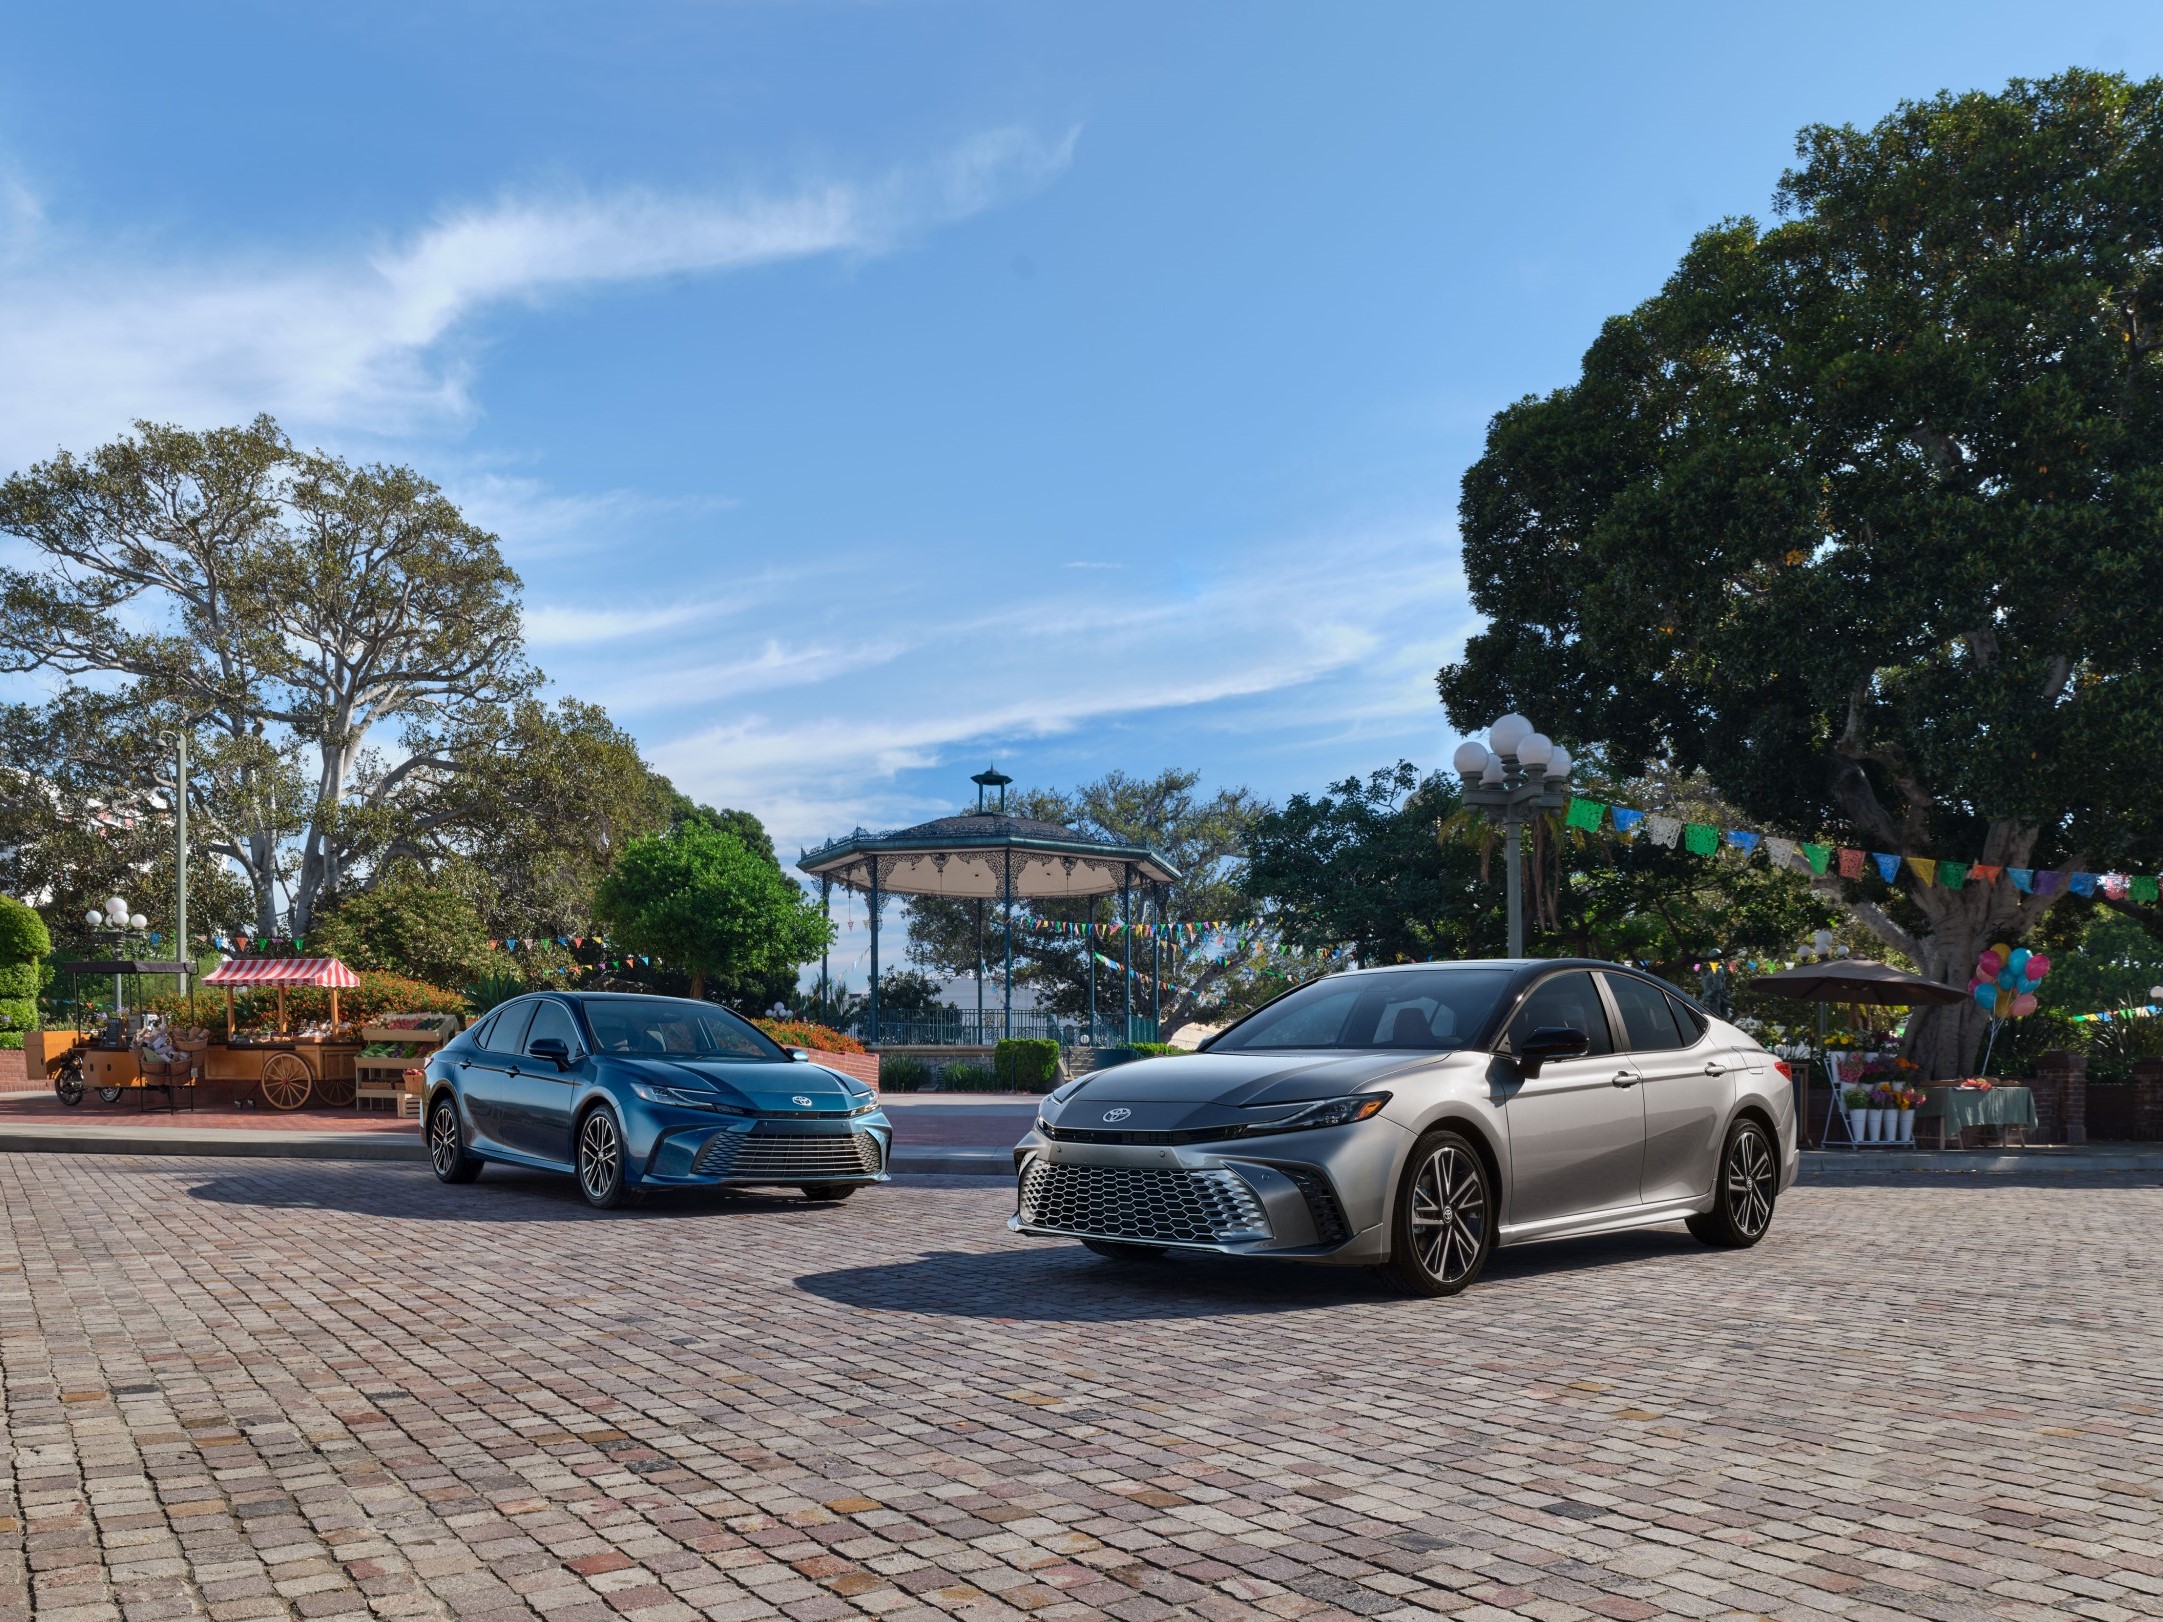 2025 Toyota Camry XLE in Reservoir Blue and Camry XSE in Celestial Silver Metallic with Jet Black Roof